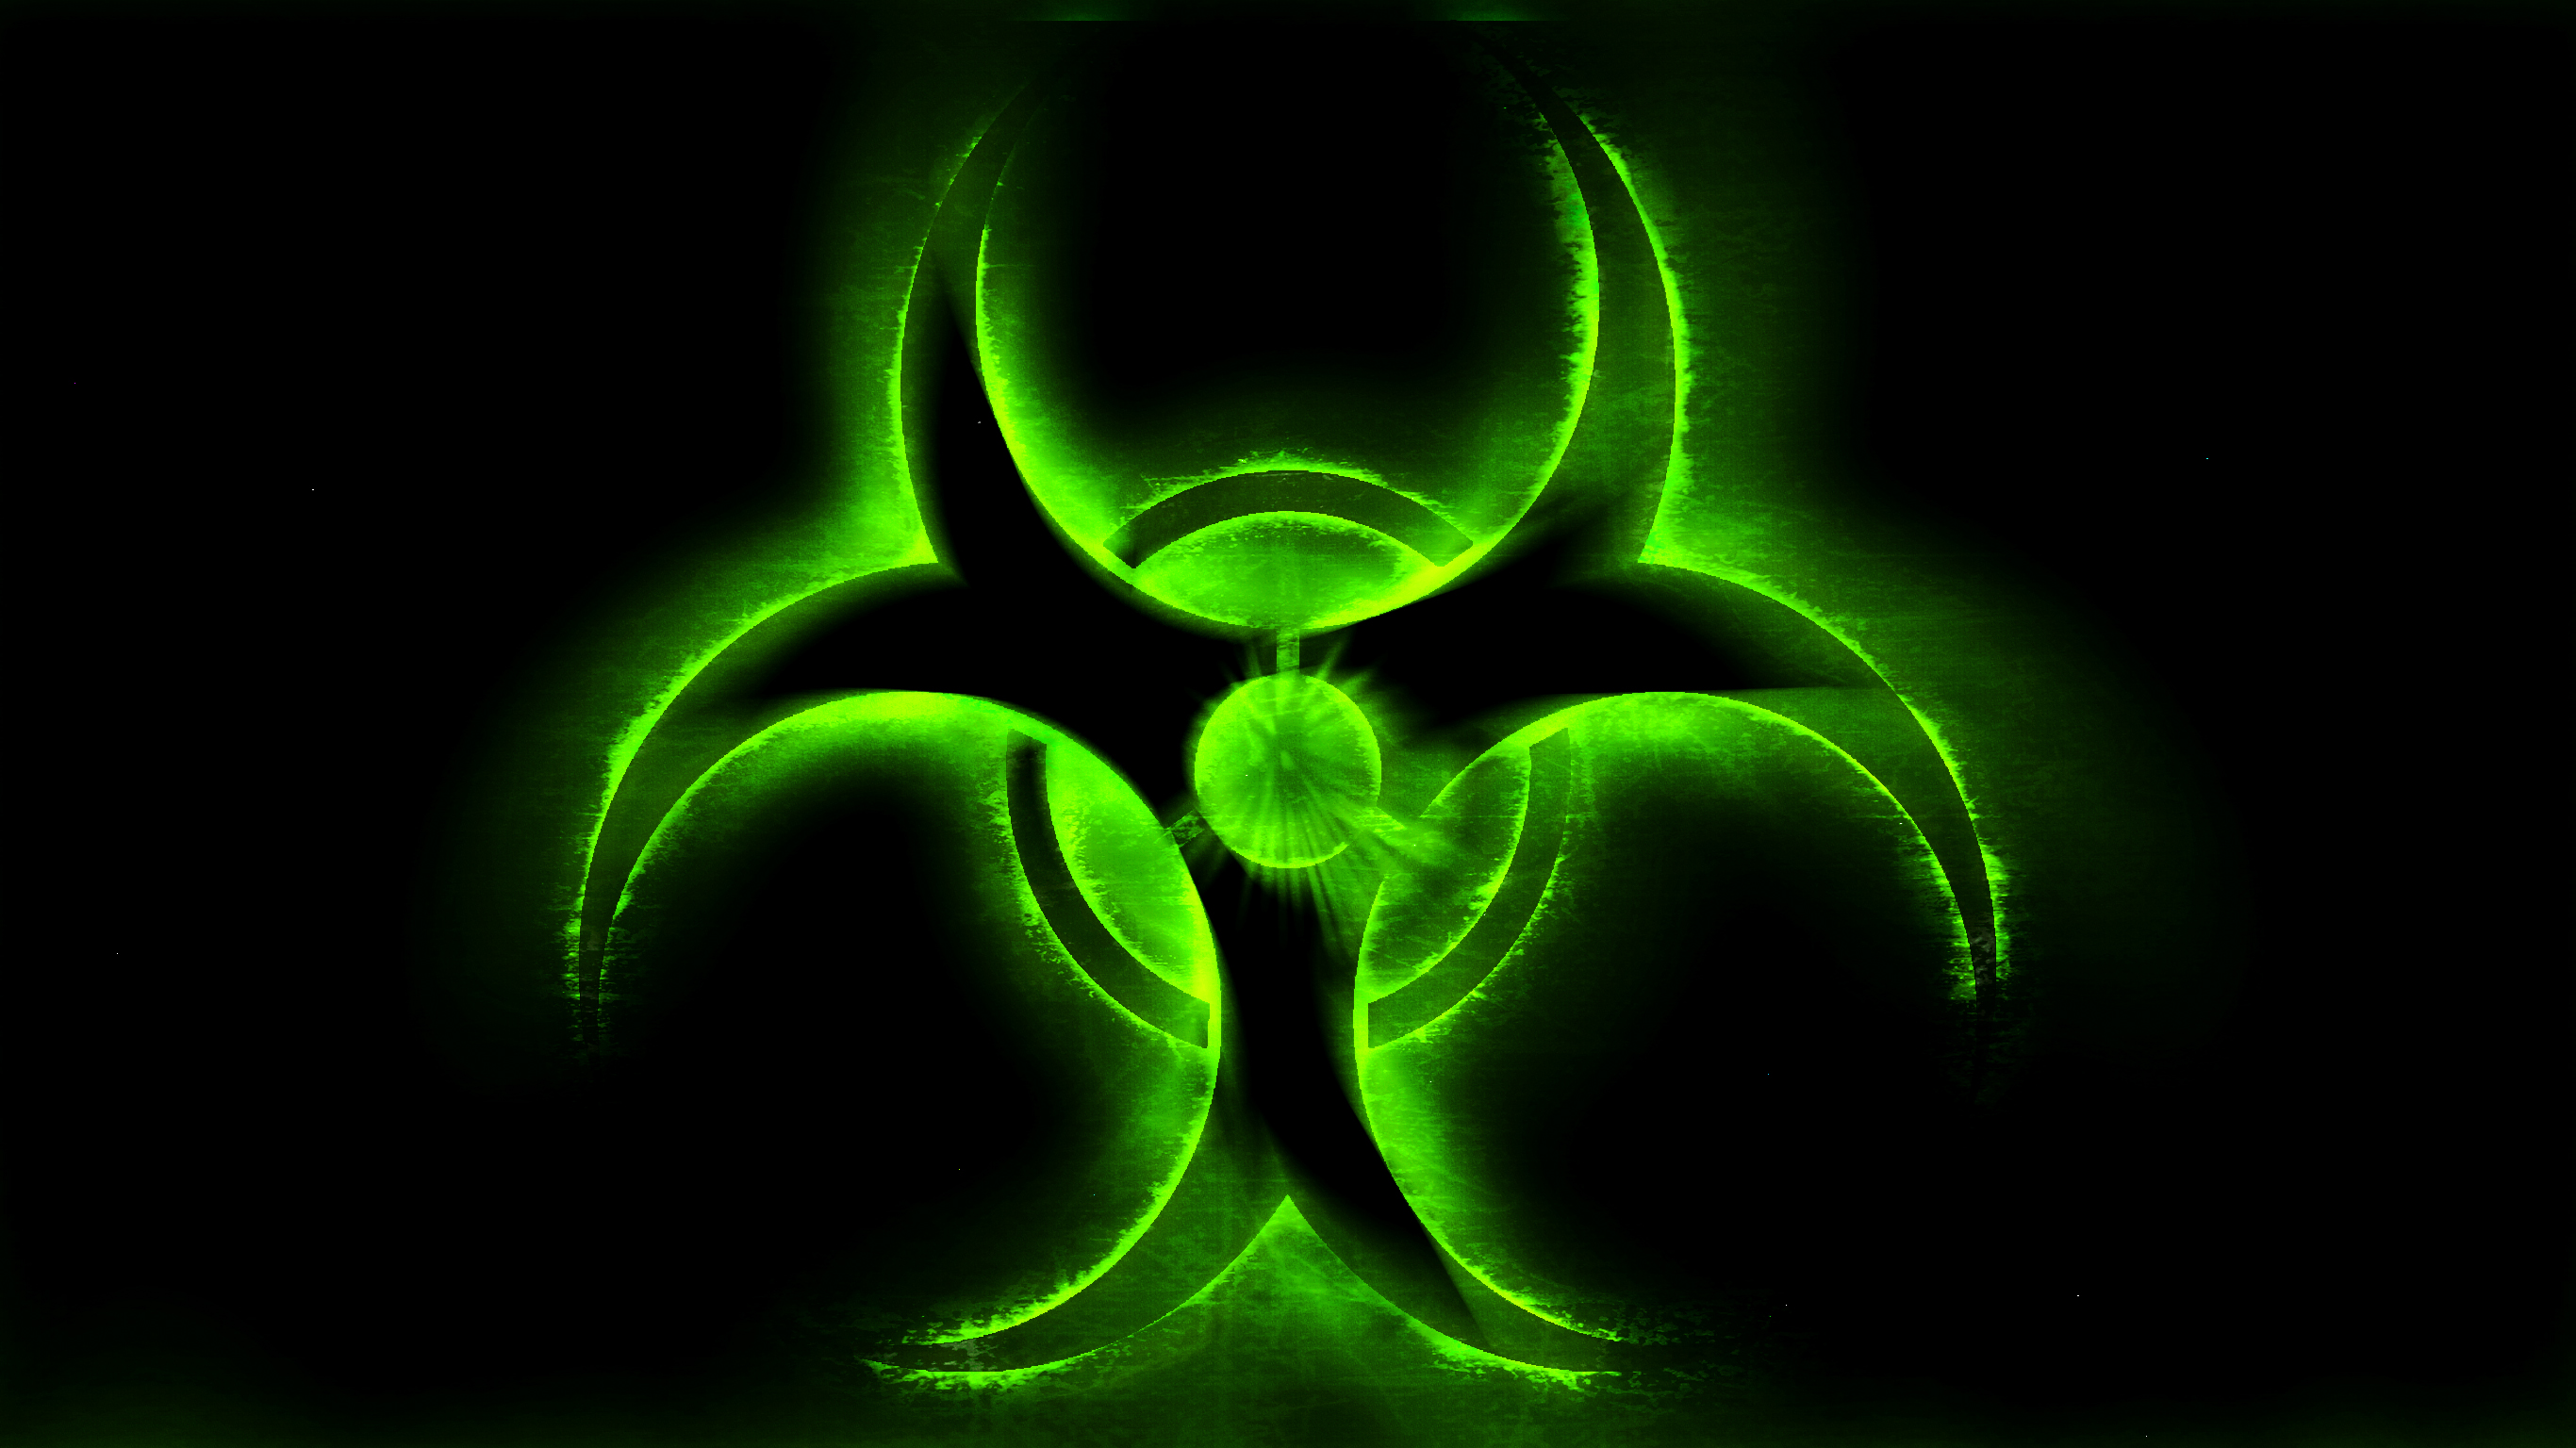 biohazard-toxic-green-by-space-project712-on-deviantart